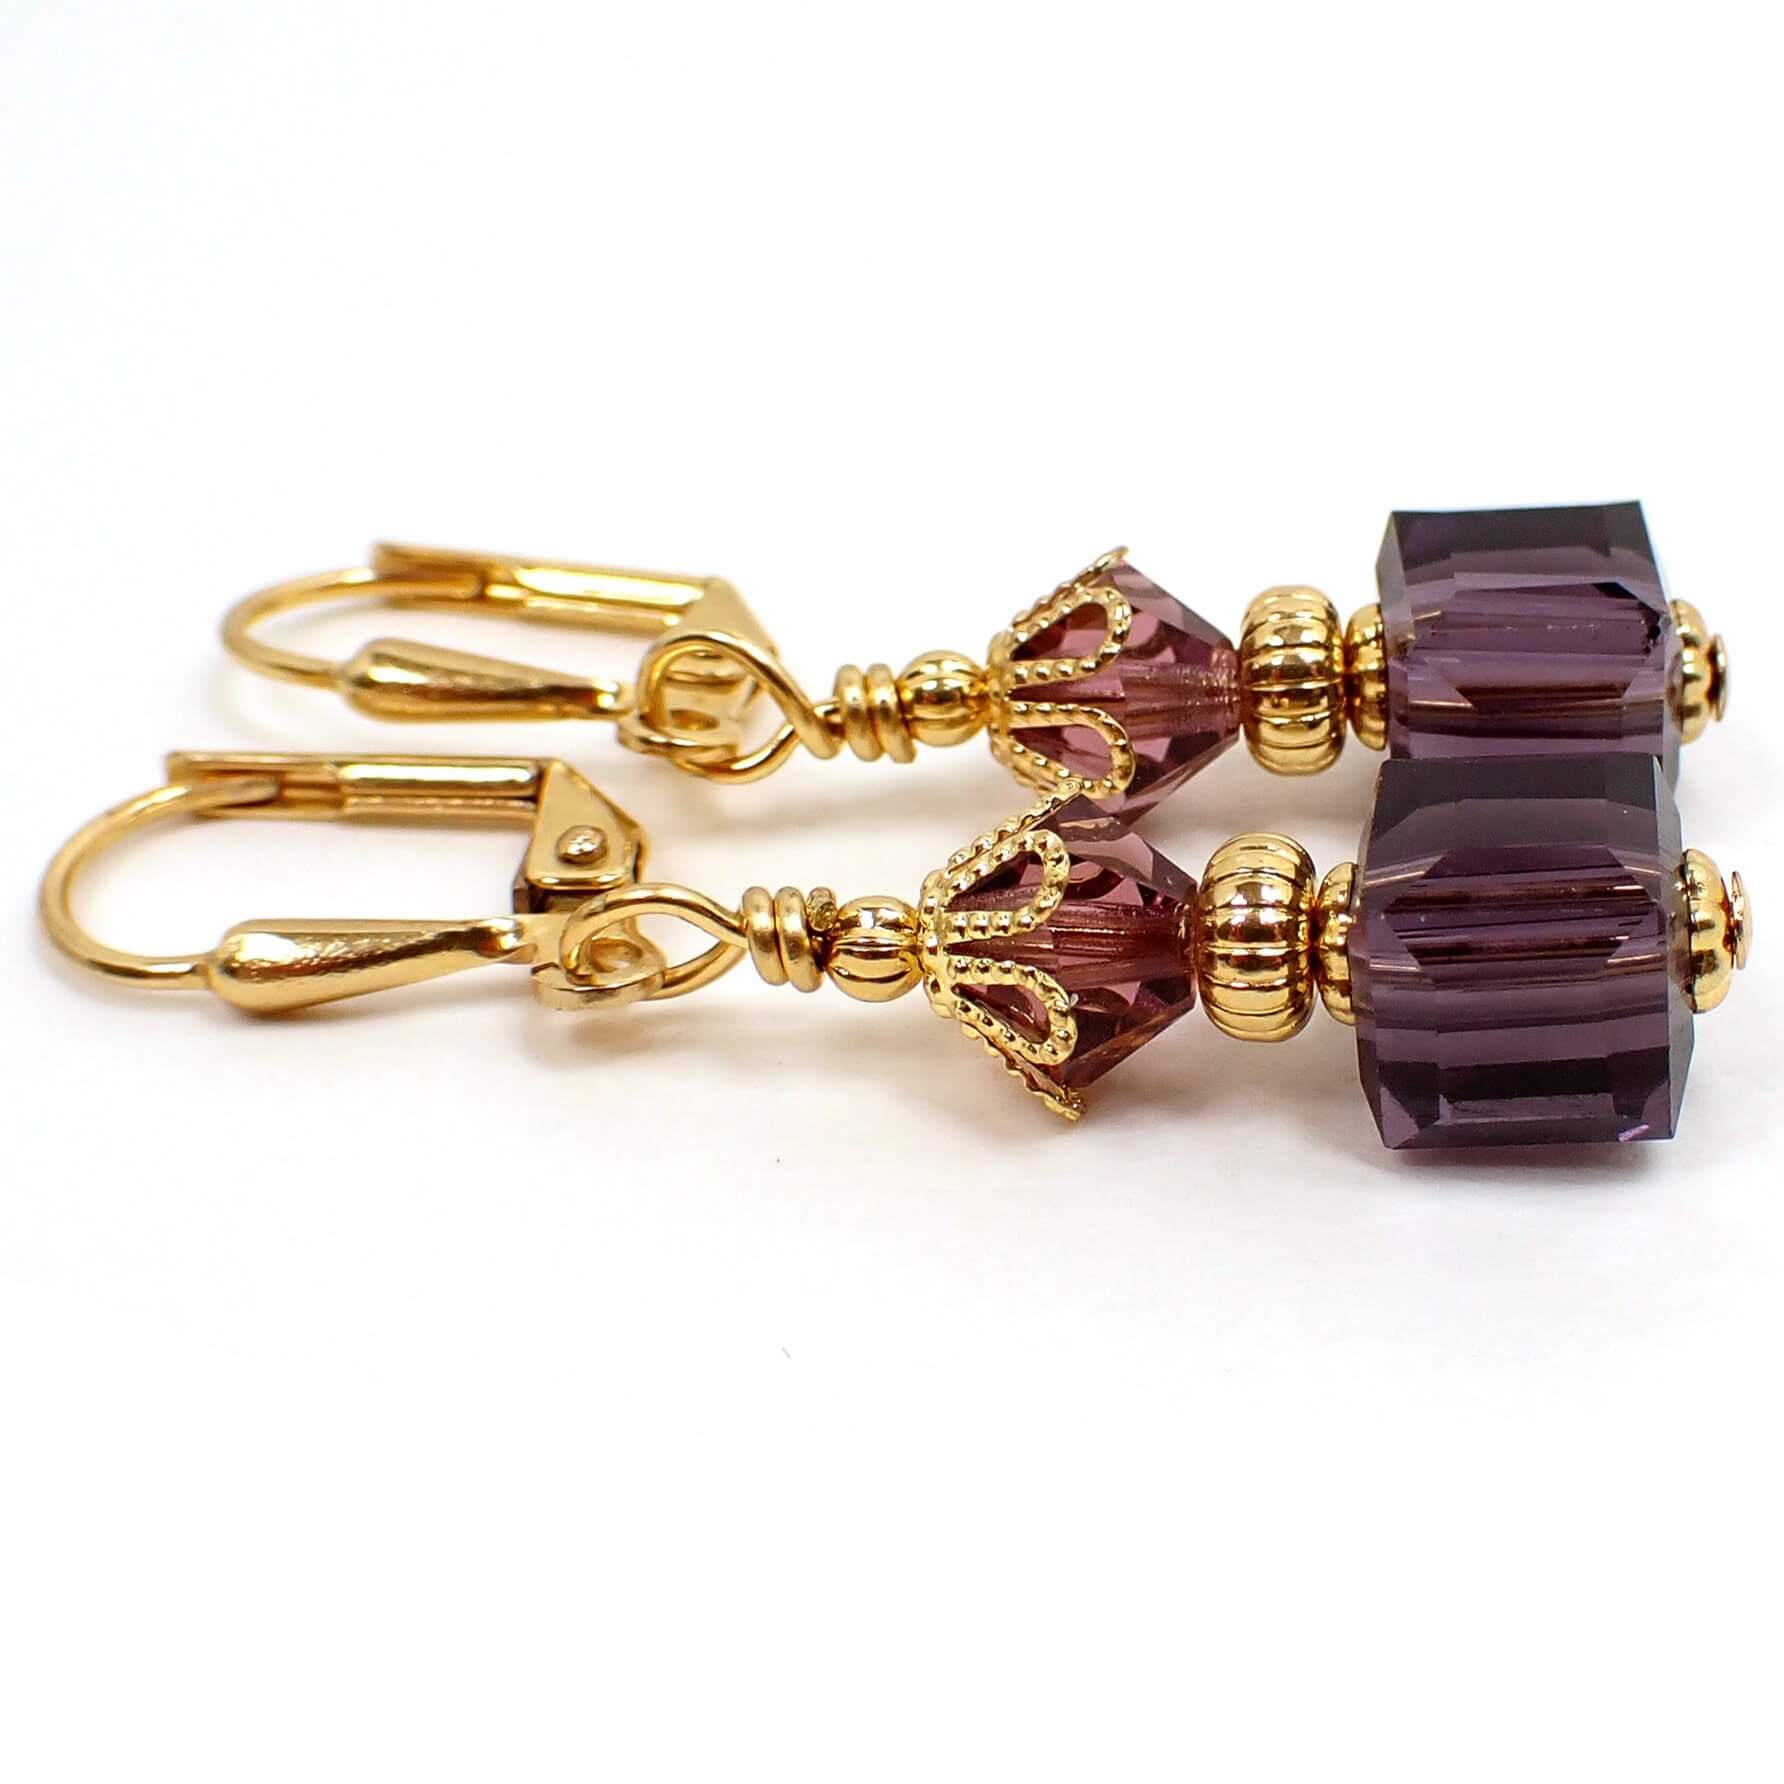 Side view of the small purple glass beaded earrings. The metal is gold plated in color. There are faceted glass crystal bicone beads at the top and small cube shaped glass beads at the bottom. The beads are purple in color.